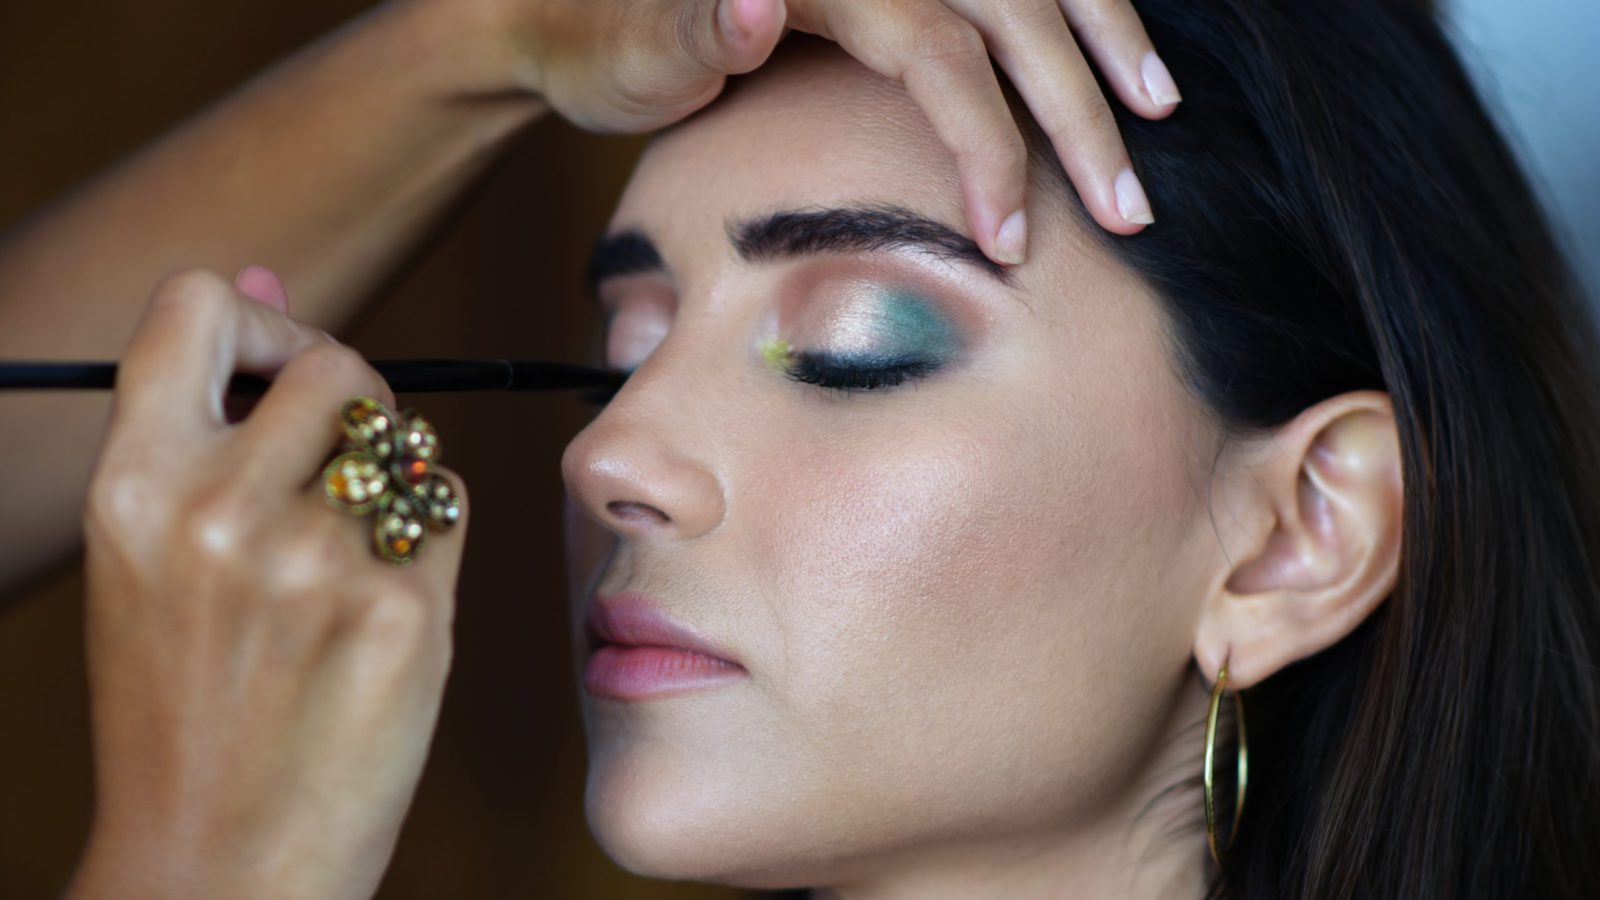 Makeup Workshops in Medellin: What to Know